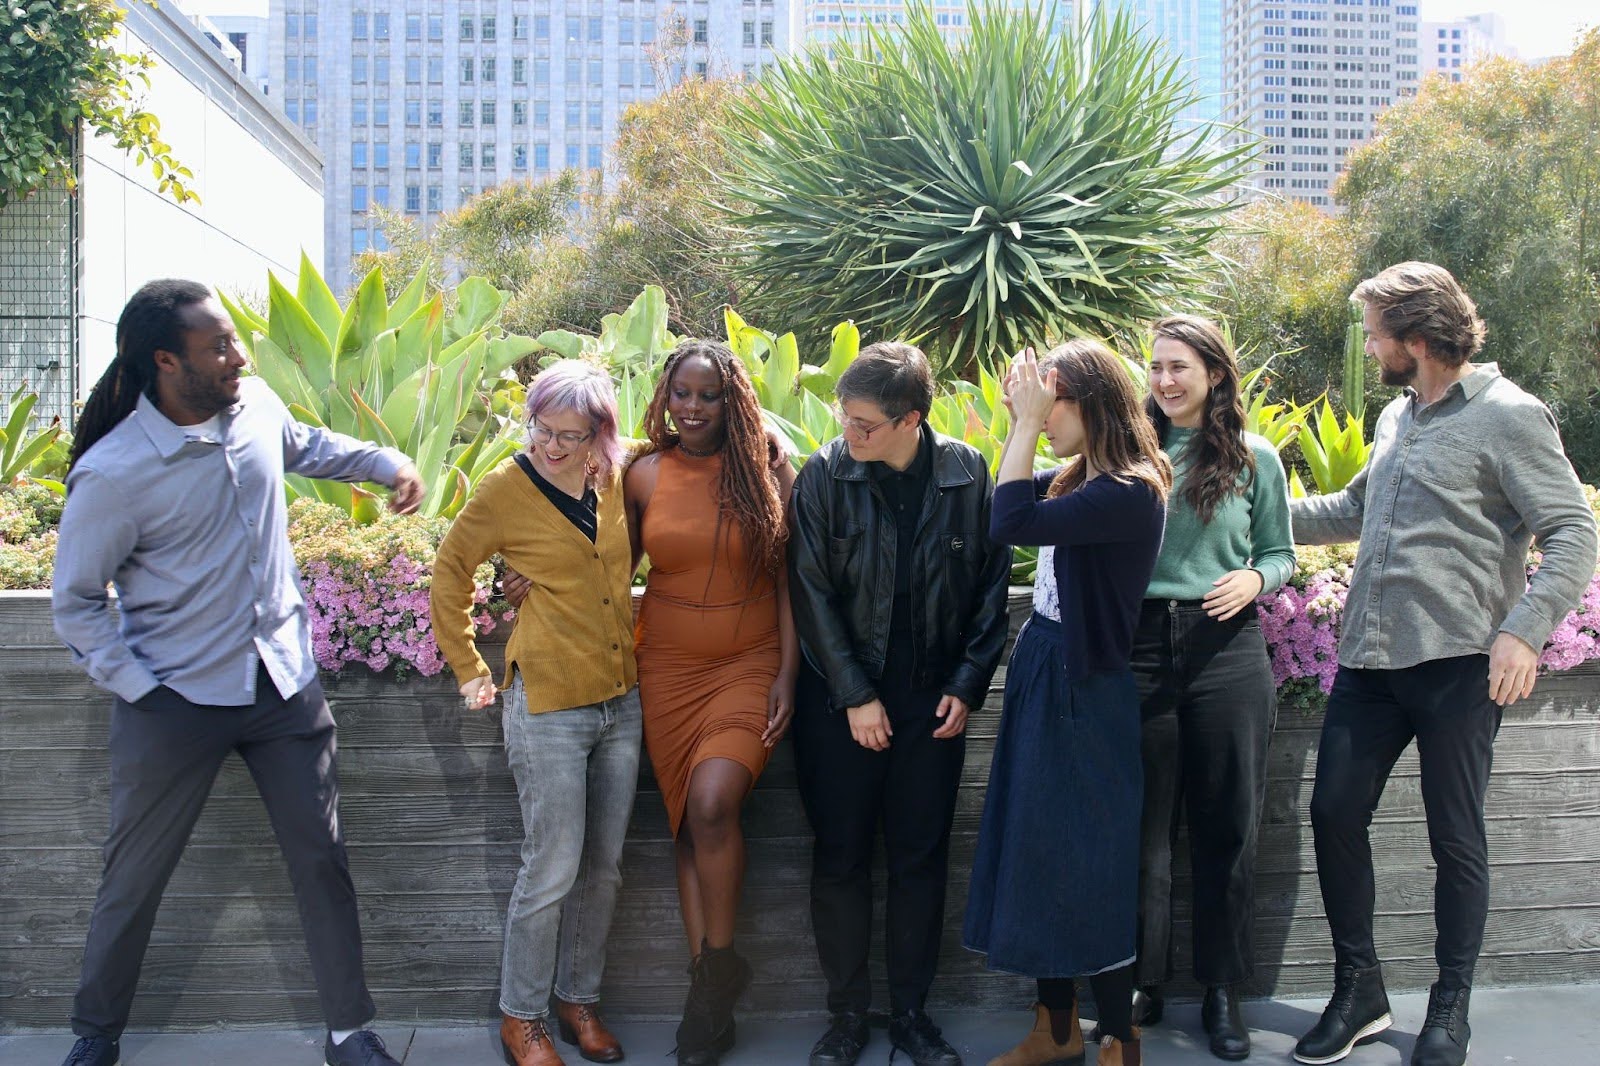 An outtake from the team photo shoot. Everyone is lining up in front of a plant-filled background, getting ready for the group photo.